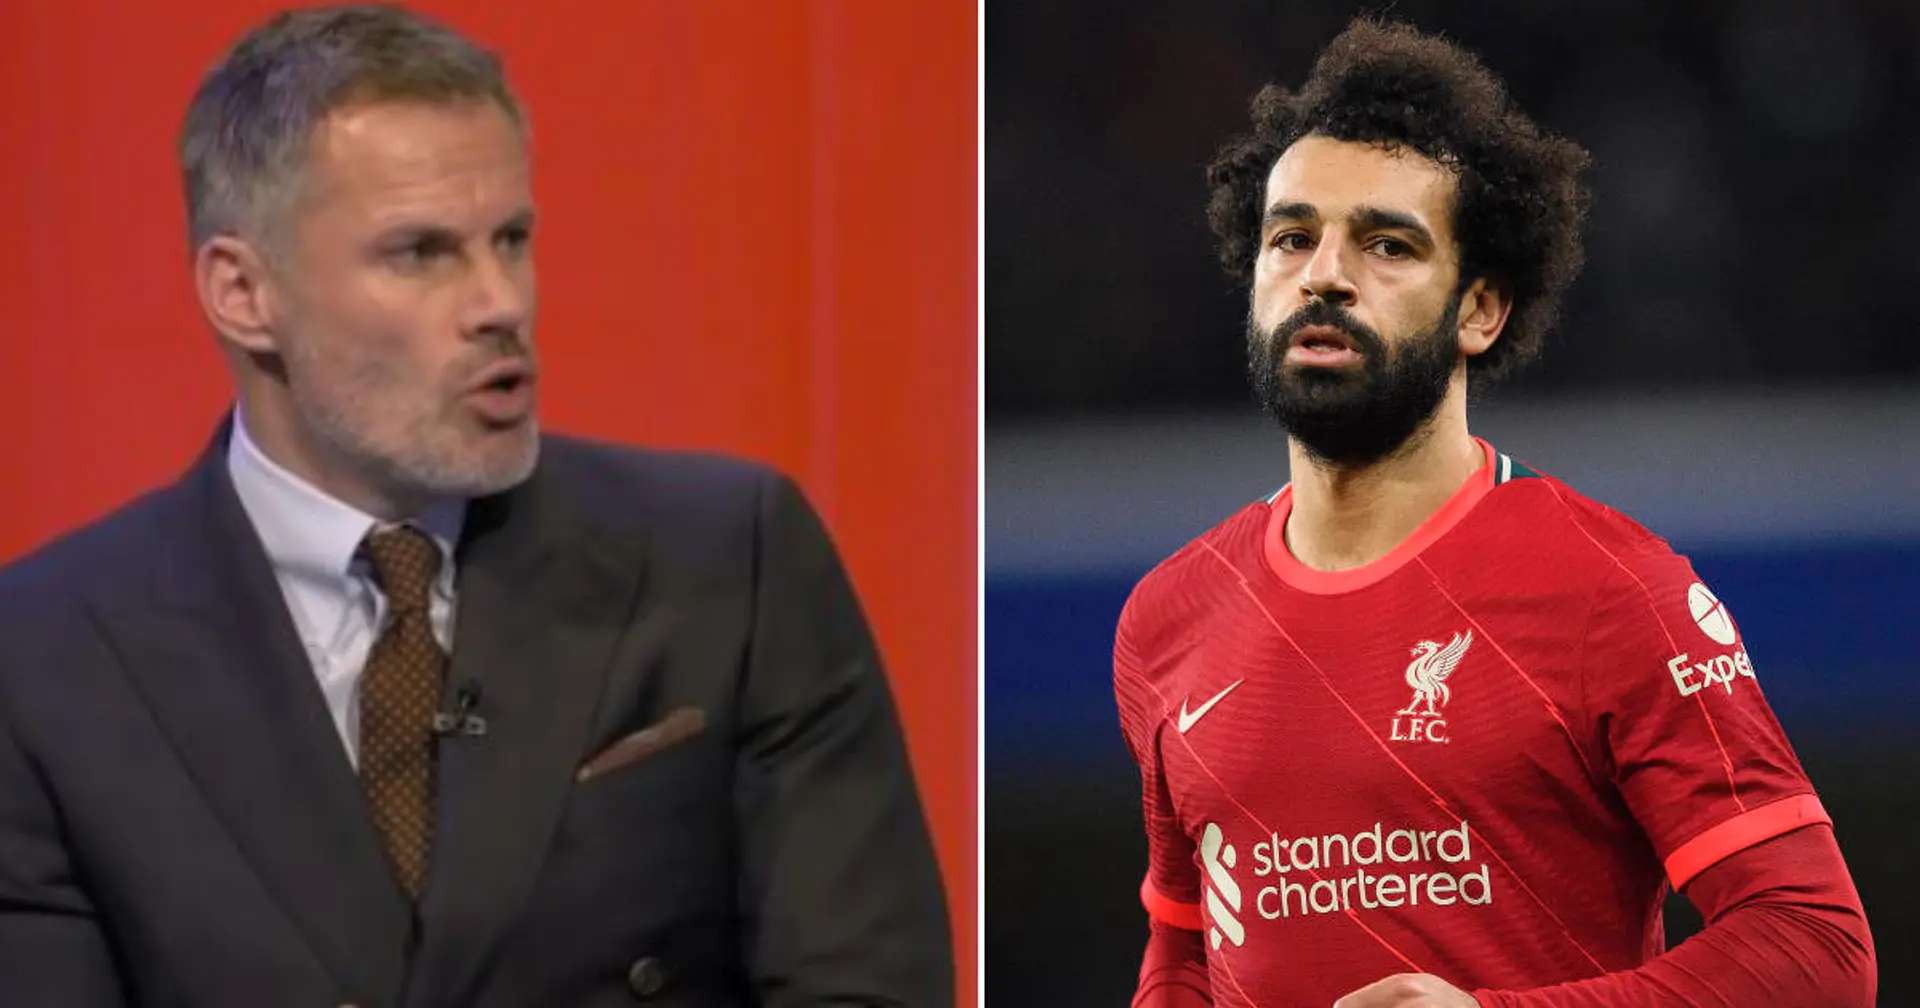 He deserves that': 'Reds urge FSG to extend Salah's contract immediately after 0-0 draw against 10-man Arsenal